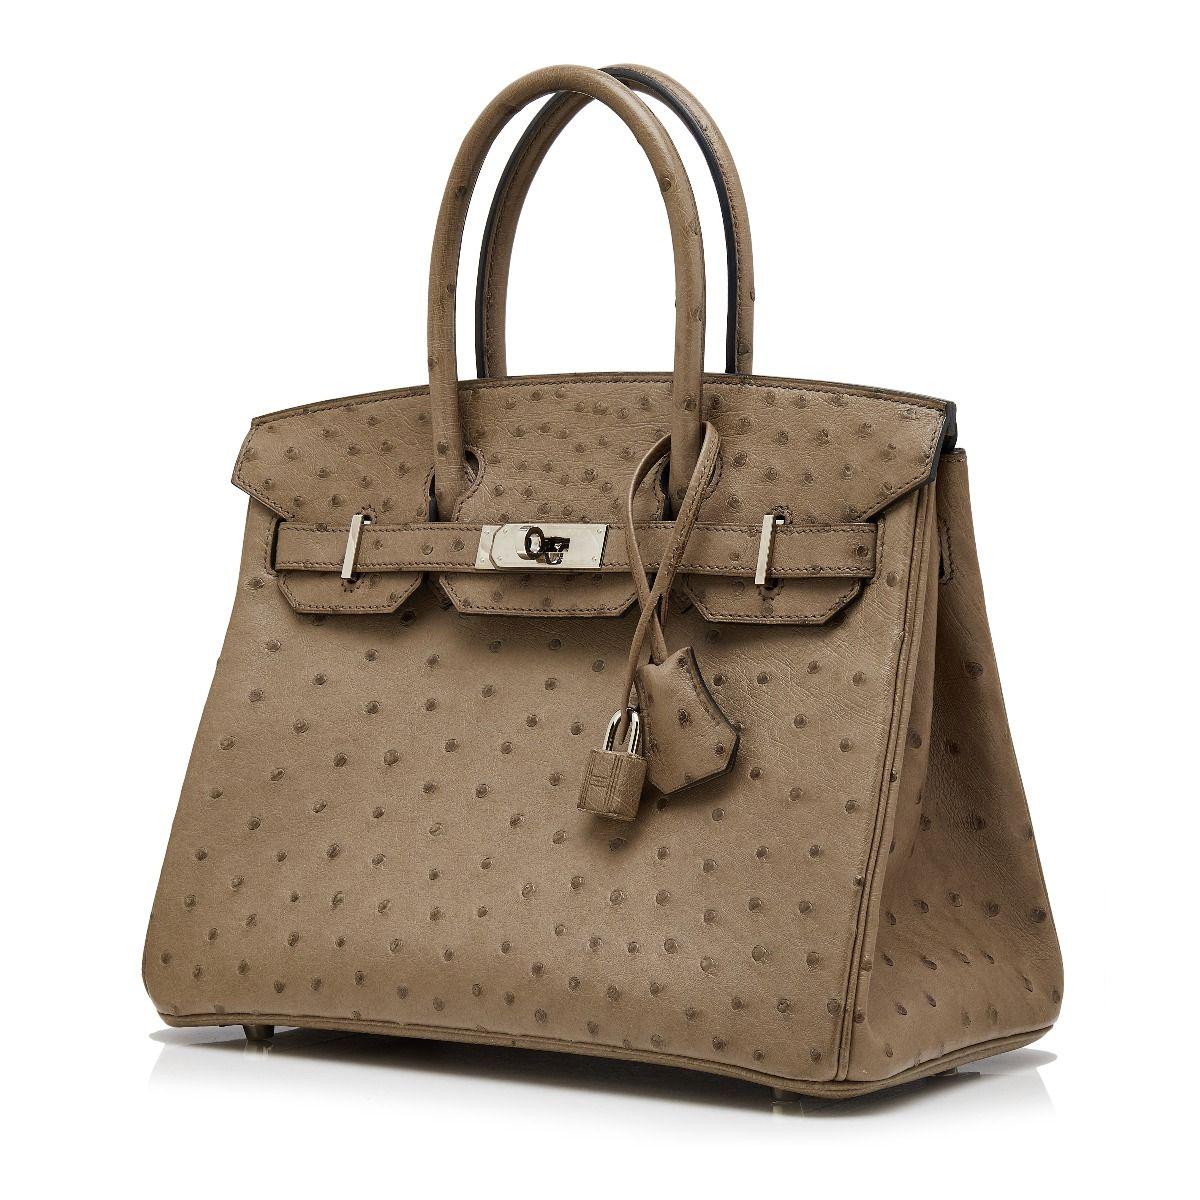 Adding a twist to the traditional Hermès Birkin, this truly spectacular, one-of-a-kind rarity showcases an earthy-brown toned exterior, crafted in ostrich skin, the rarest and most coveted of the exotic leathers, highly distinguishable by the